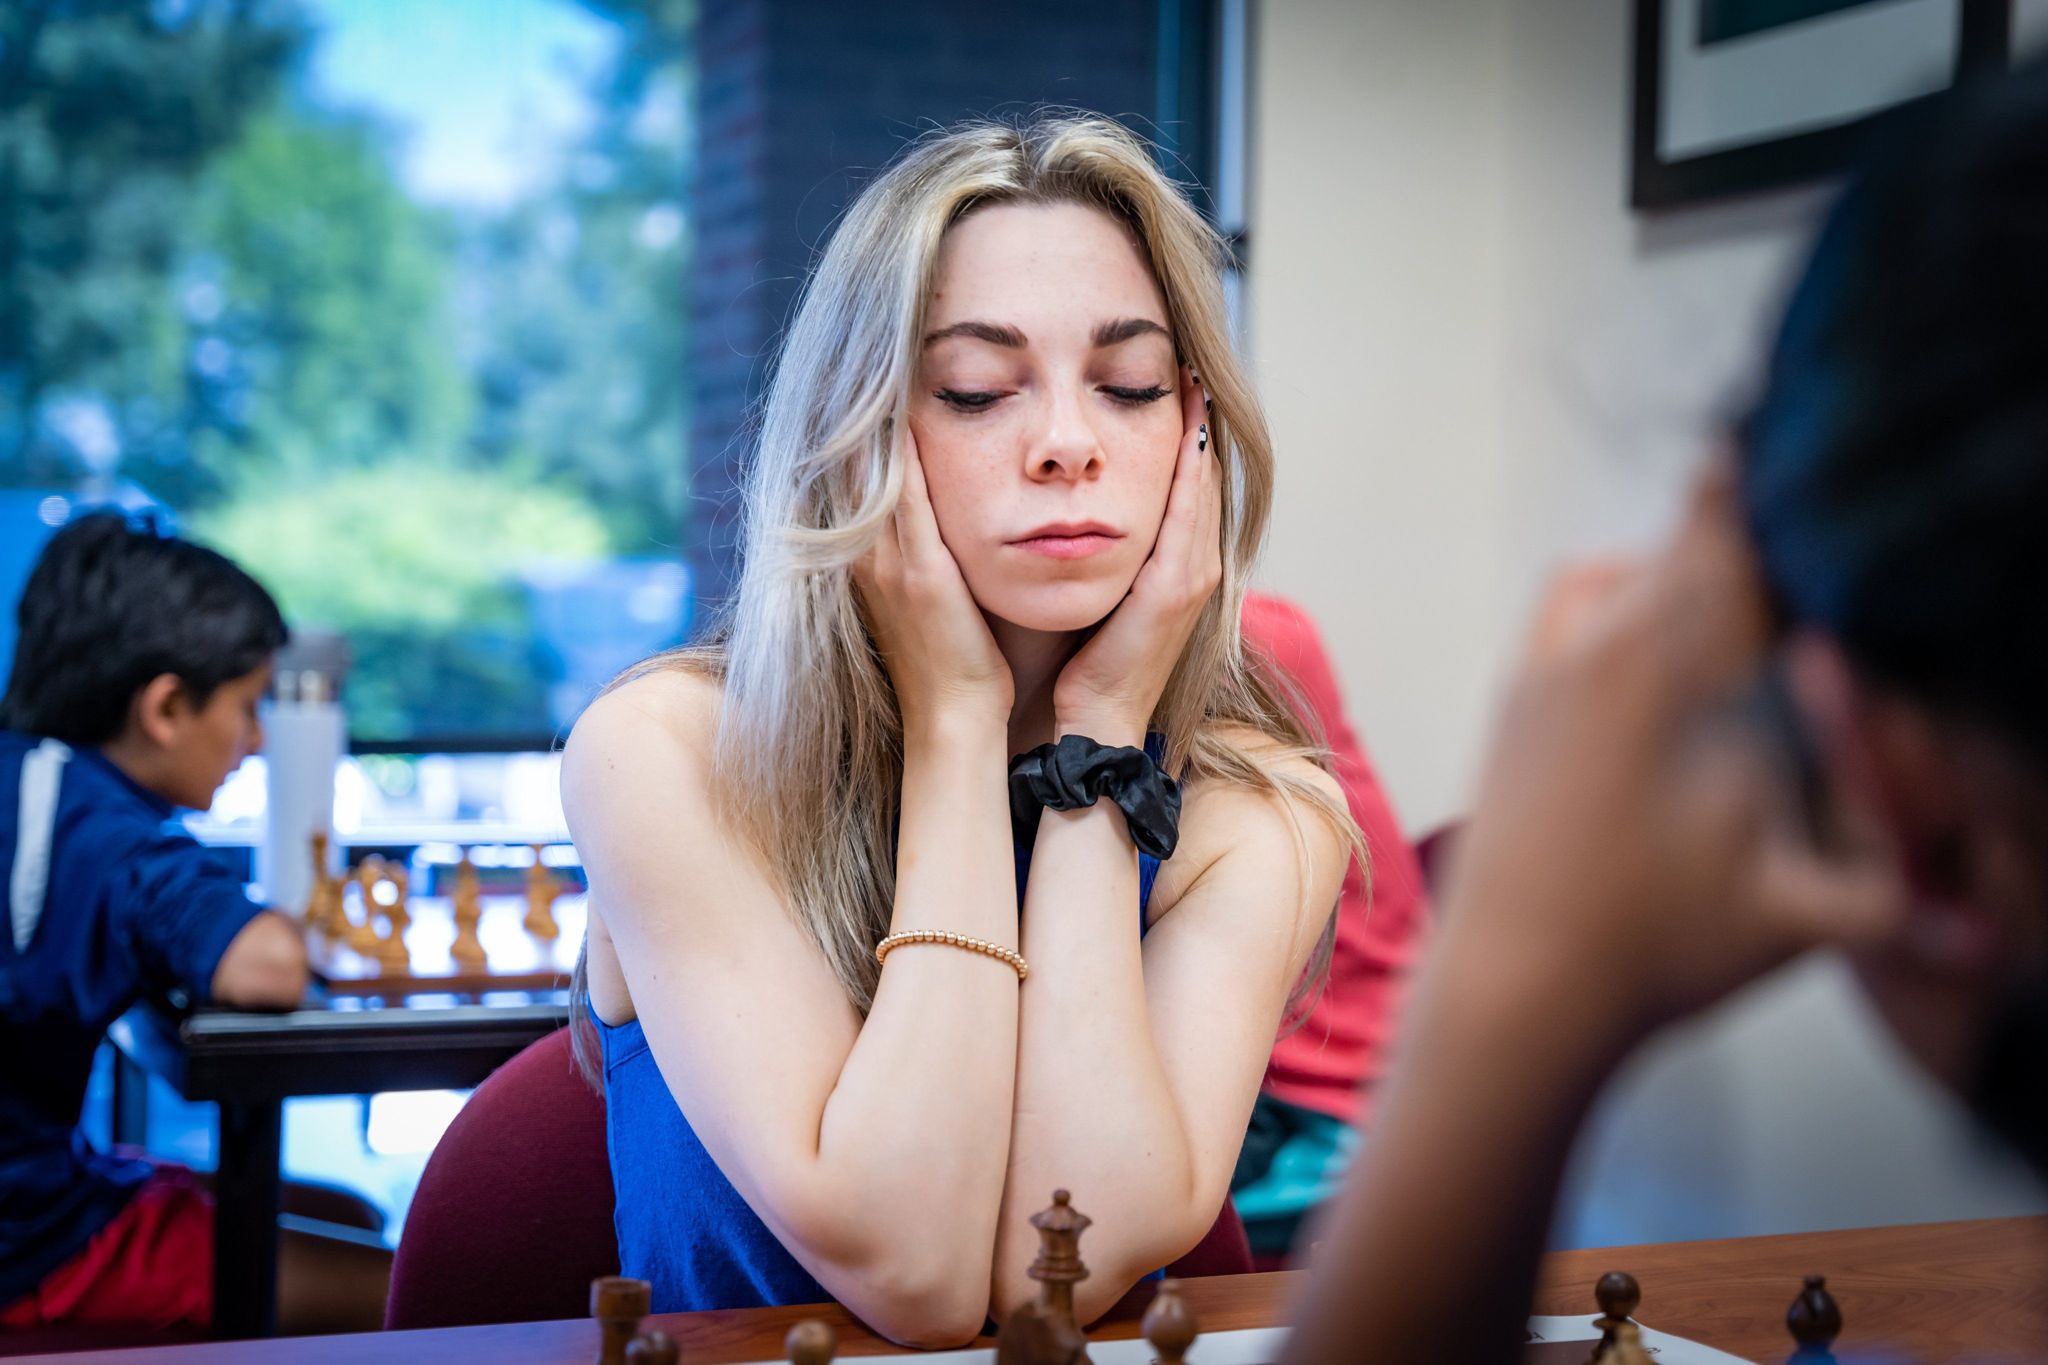 Video of Dina Belenkaya cheating OTB in a chess hustle at the park